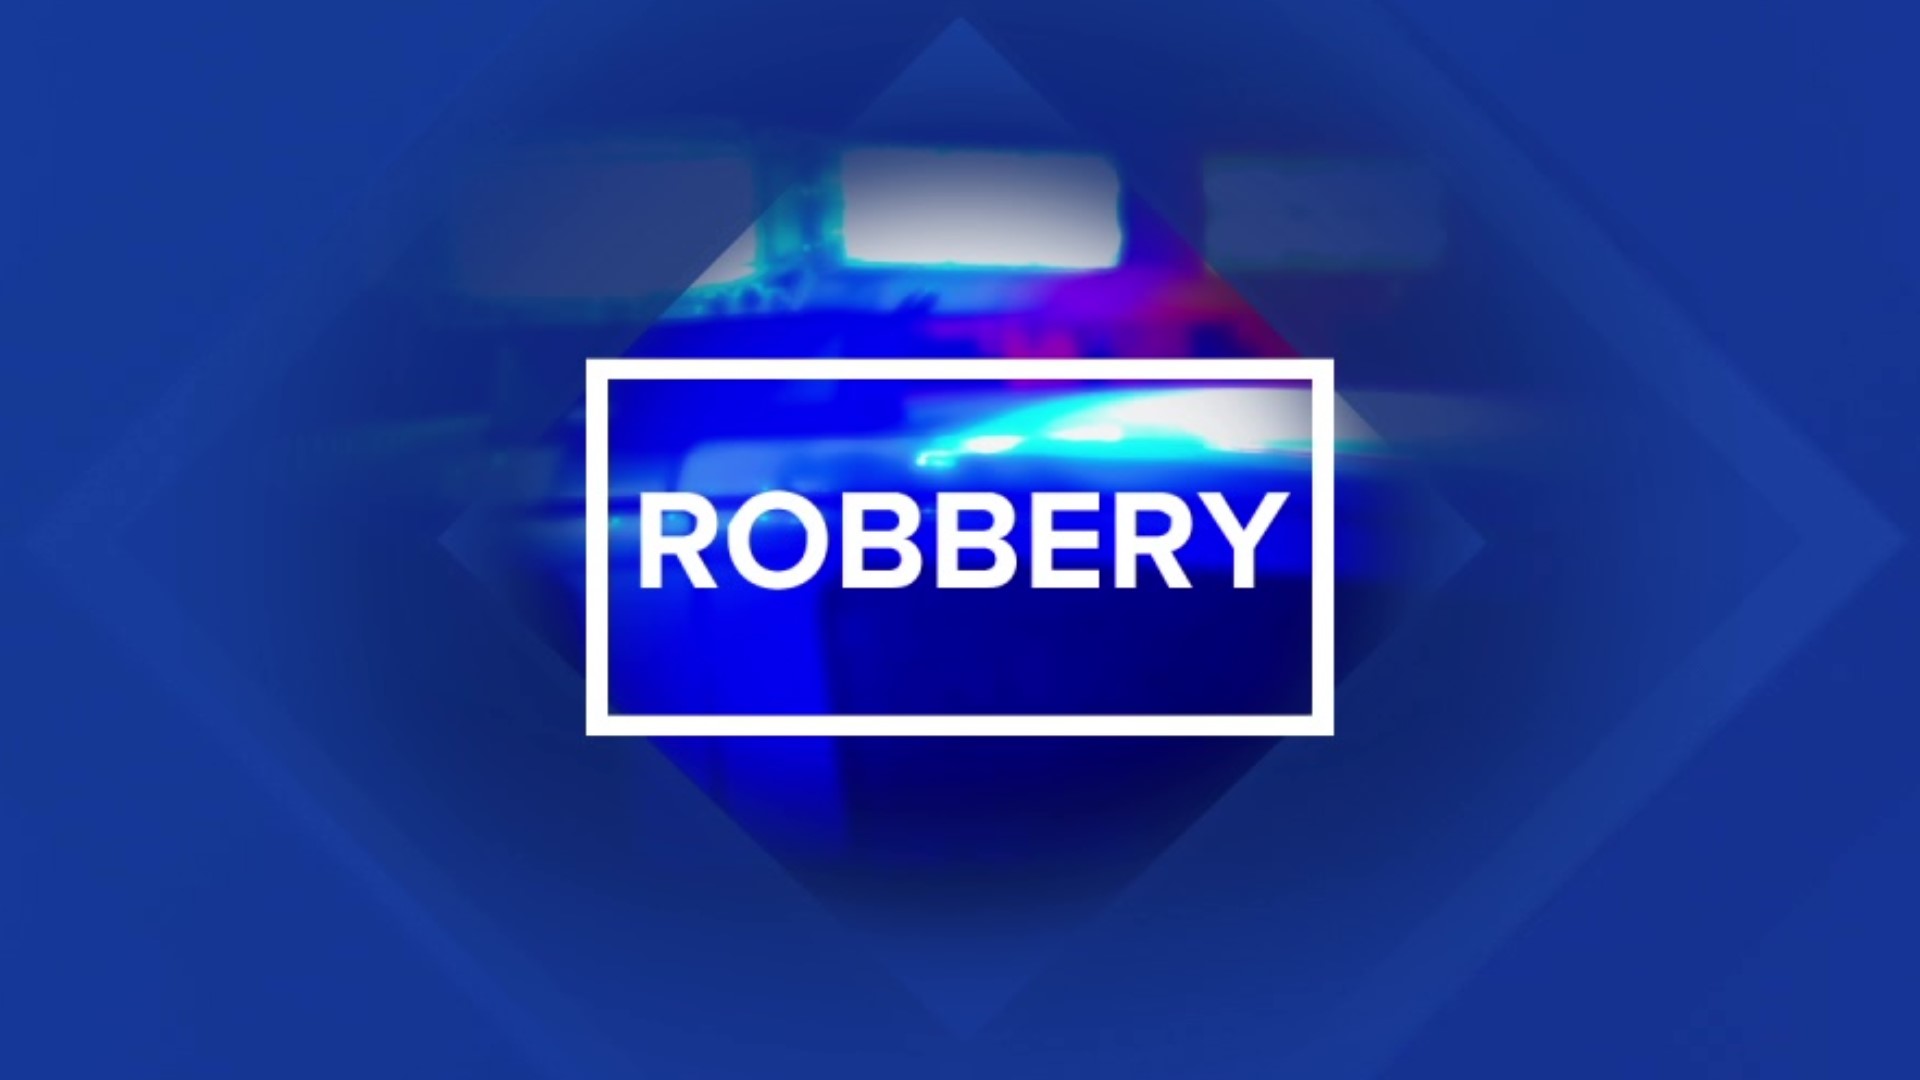 A man is in custody after police say he robbed Mifflinburg Fine Wine and Good Spirits and stabbed a man at Mifflinburg Buggy Wash.